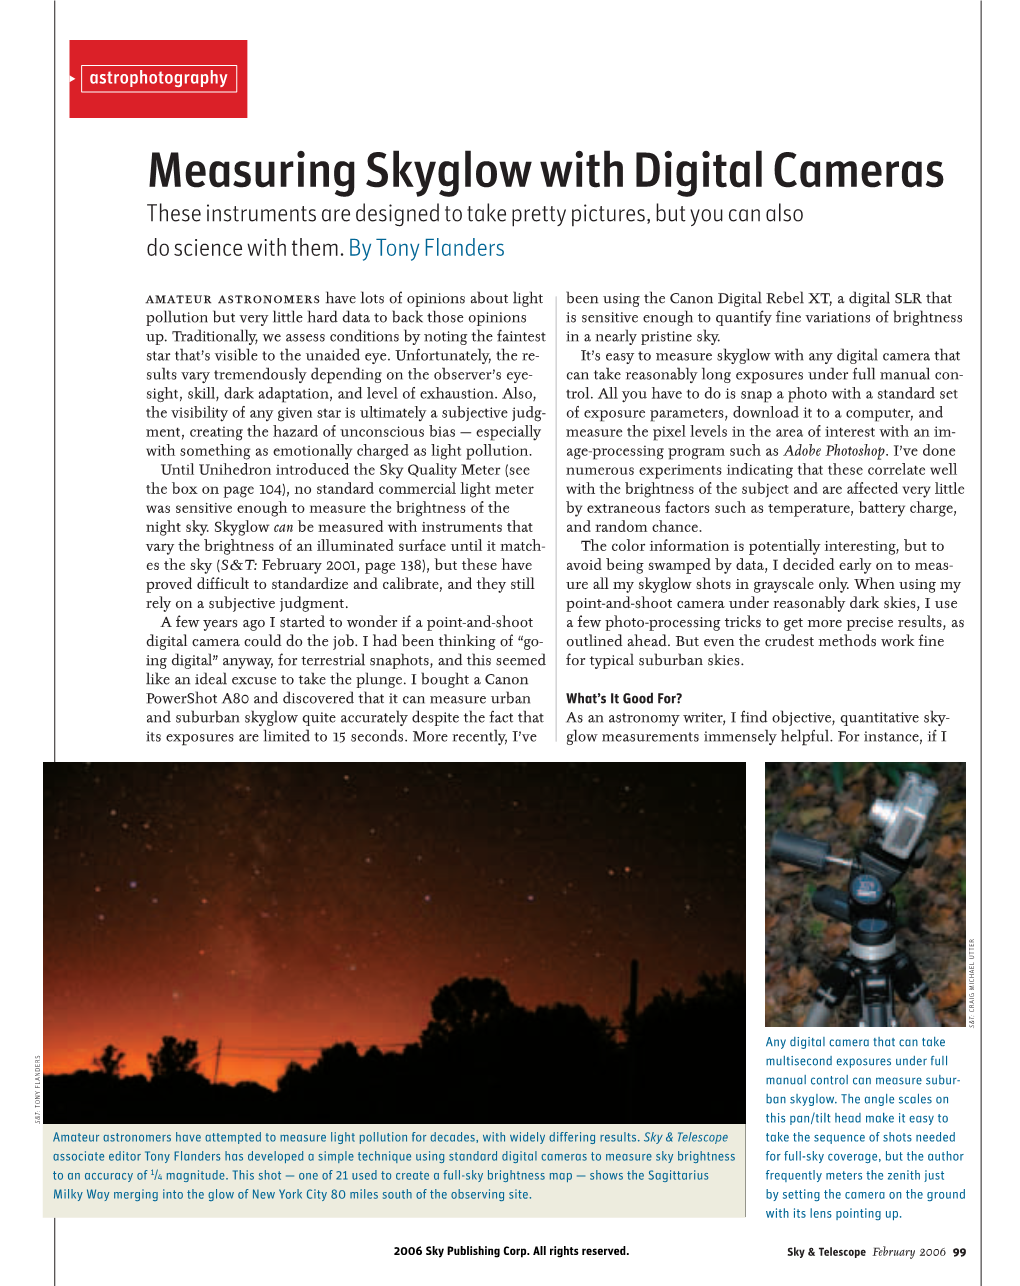 Measuring Skyglow with Digital Cameras These Instruments Are Designed to Take Pretty Pictures, but You Can Also Do Science with Them